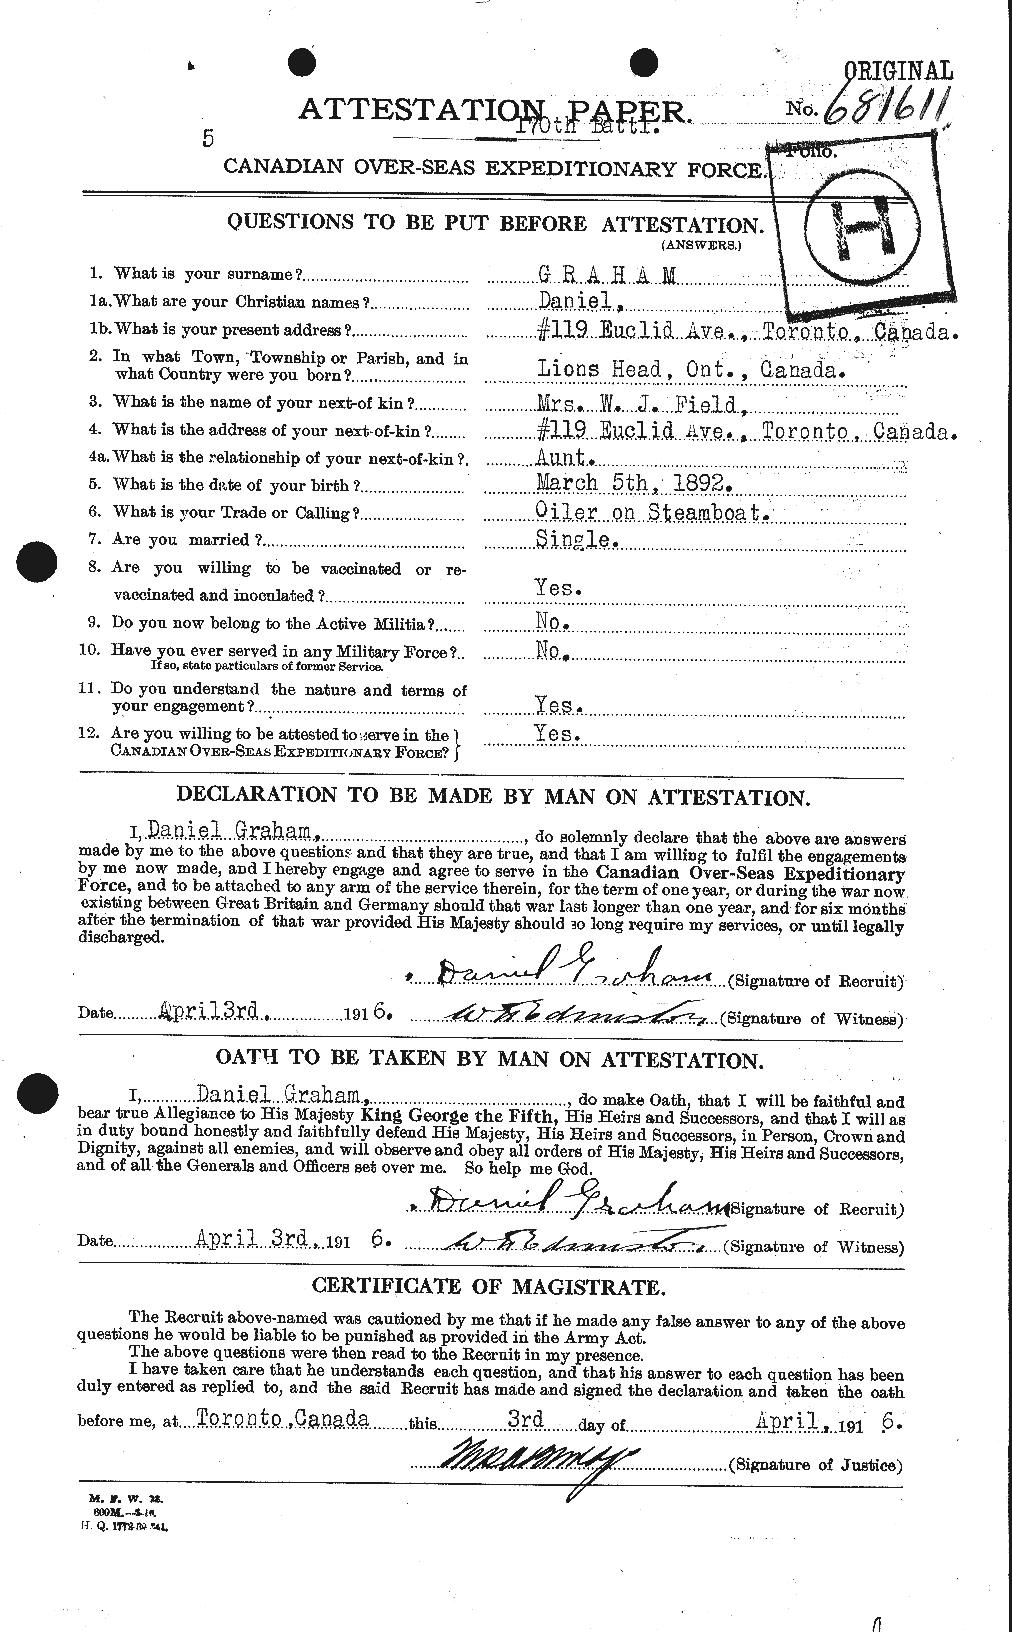 Personnel Records of the First World War - CEF 353810a